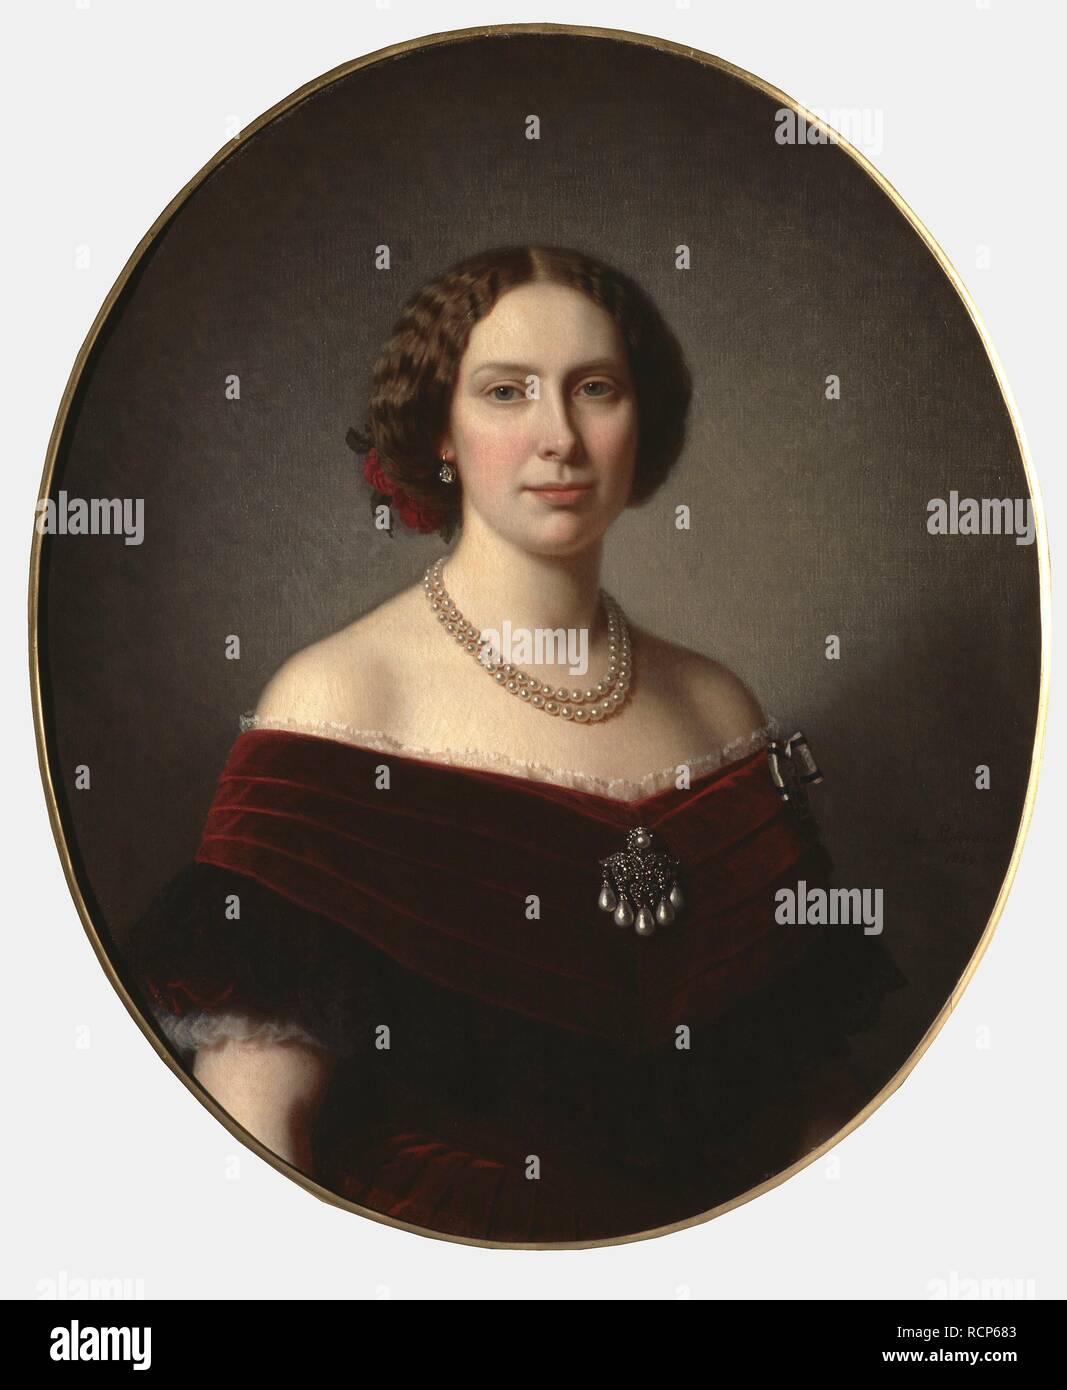 Portrait of Louise of the Netherlands (1828-1871), Queen of Sweden and Norway. Museum: Nationalmuseum Stockholm. Author: AMALIA LINDEGREN. Stock Photo